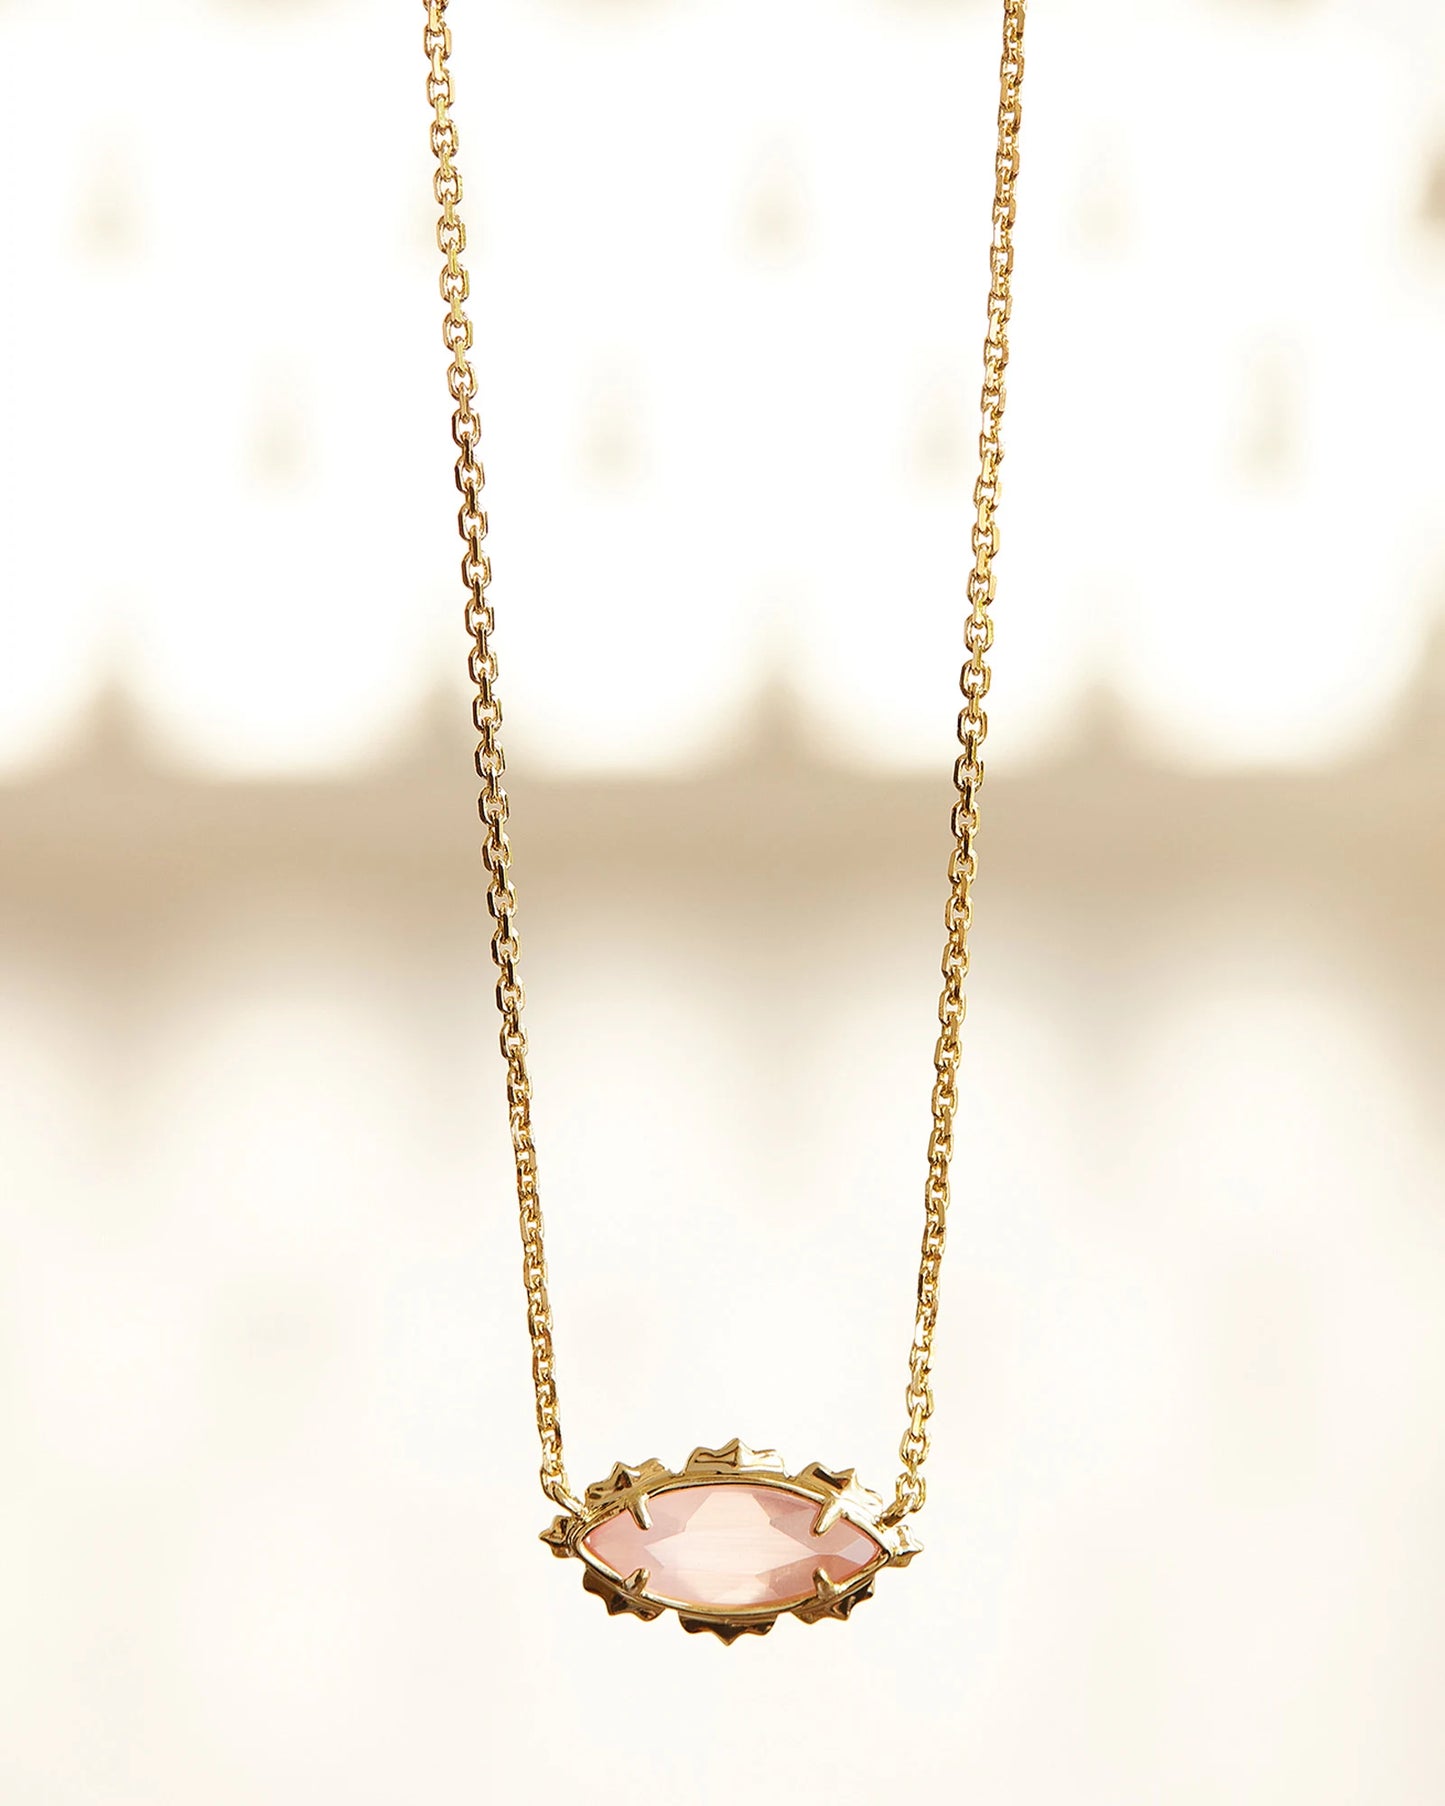 Genevieve Gold Short Pendant Necklace in Luster Plated Pink Cat Eye